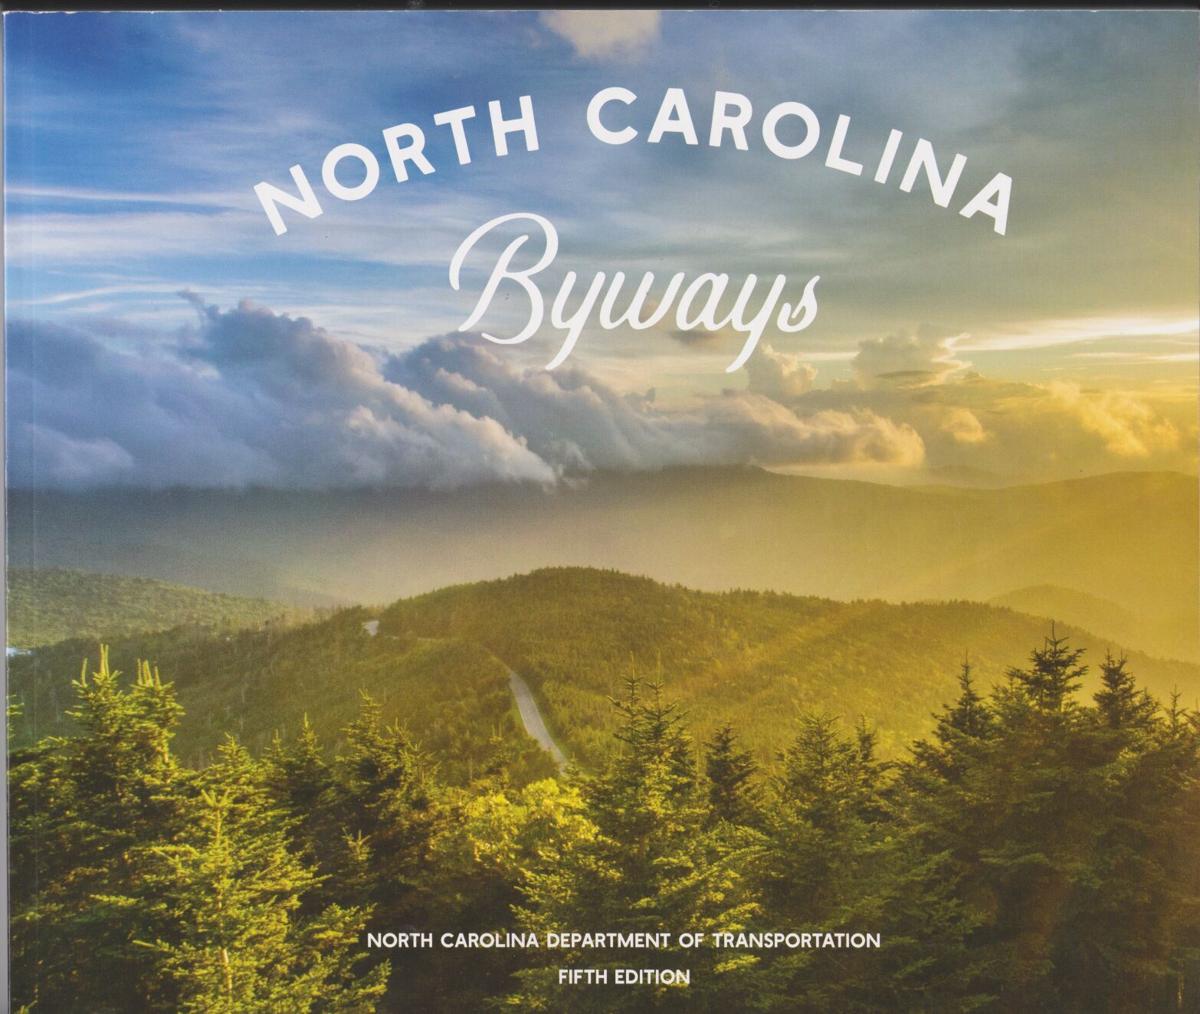 NC Scenic Byways cover 001.jpg